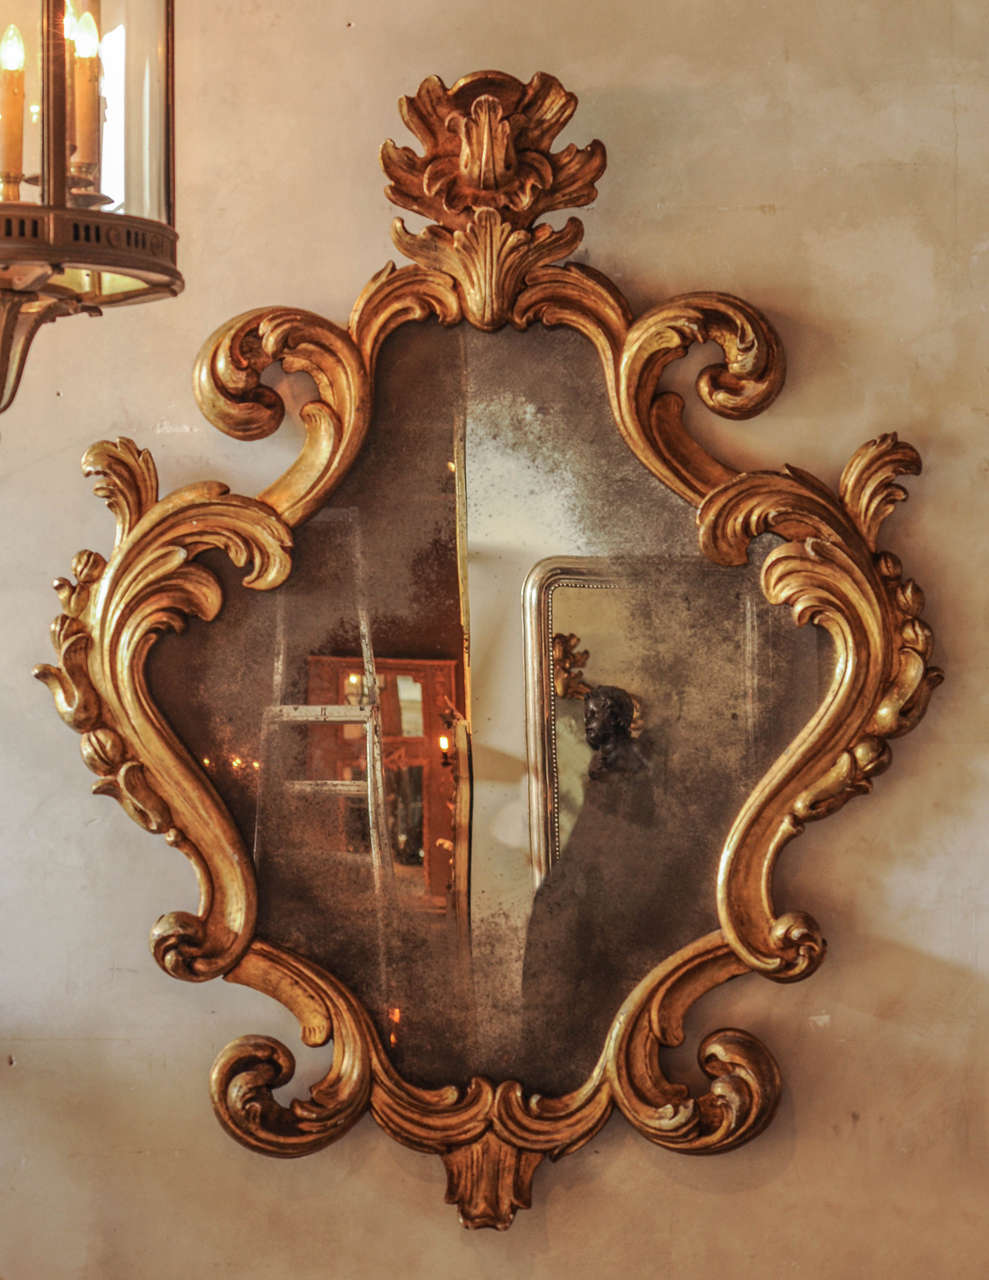 A large 18th century Italian Baroque carved giltwood mirror with weathered mirror glass.